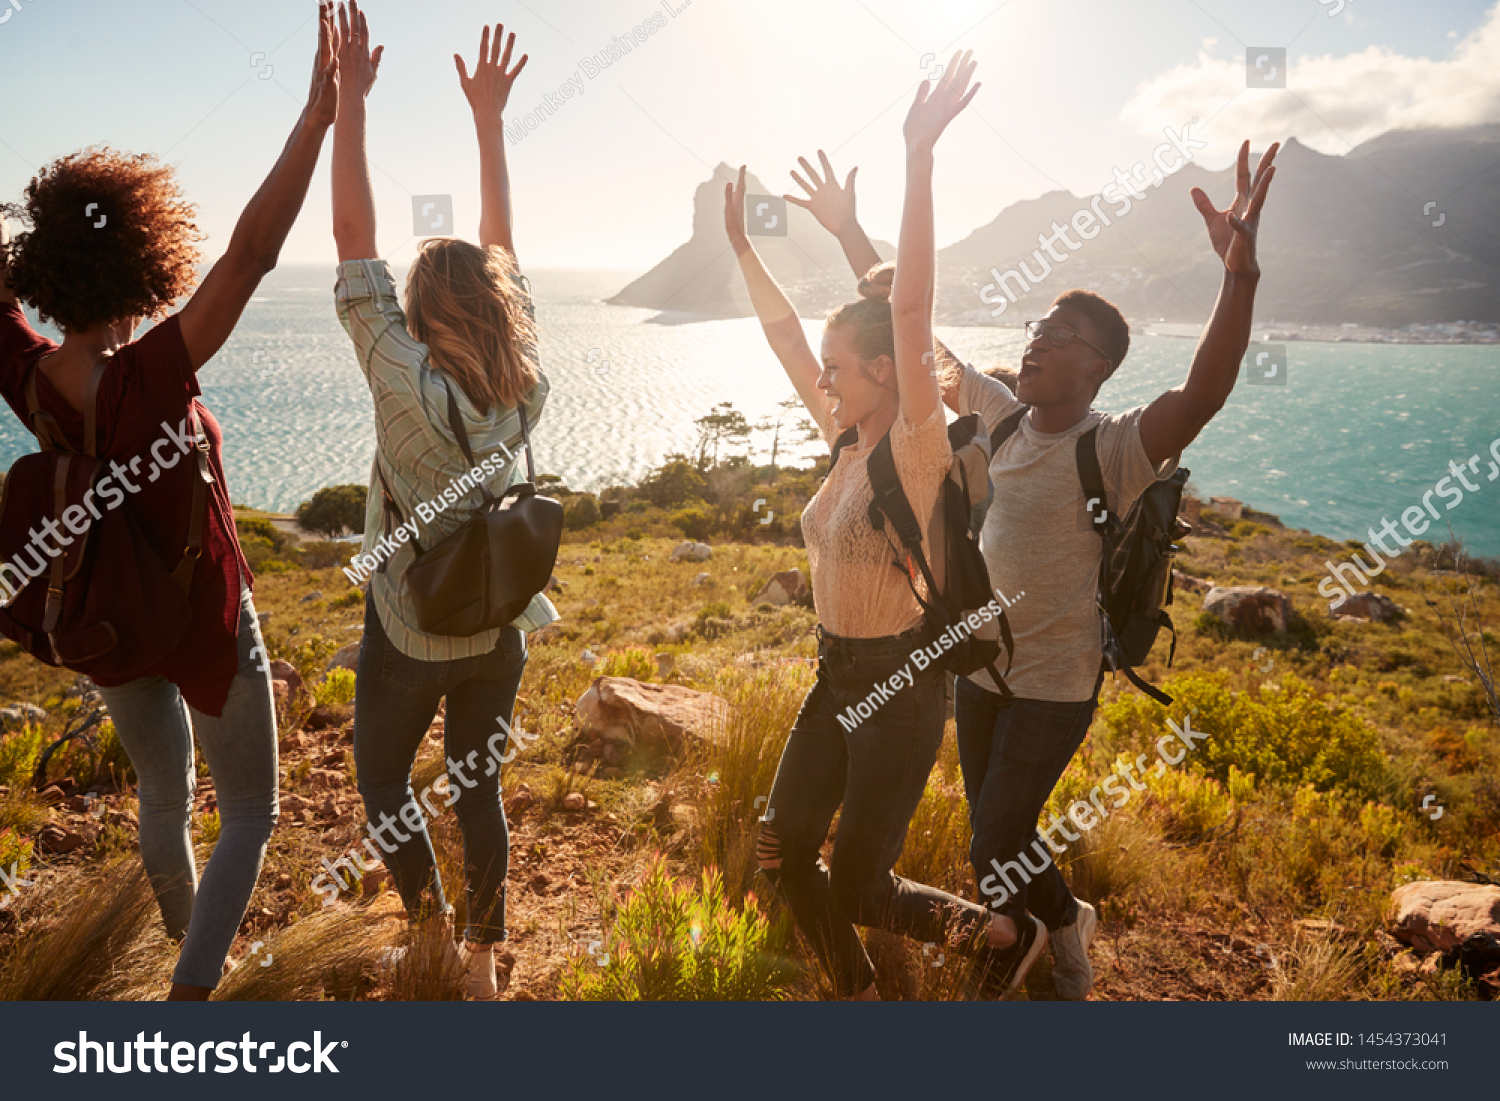 Millennial friends on a hiking trip celebrate reaching the summit, cheering with arms in the air #1454373041